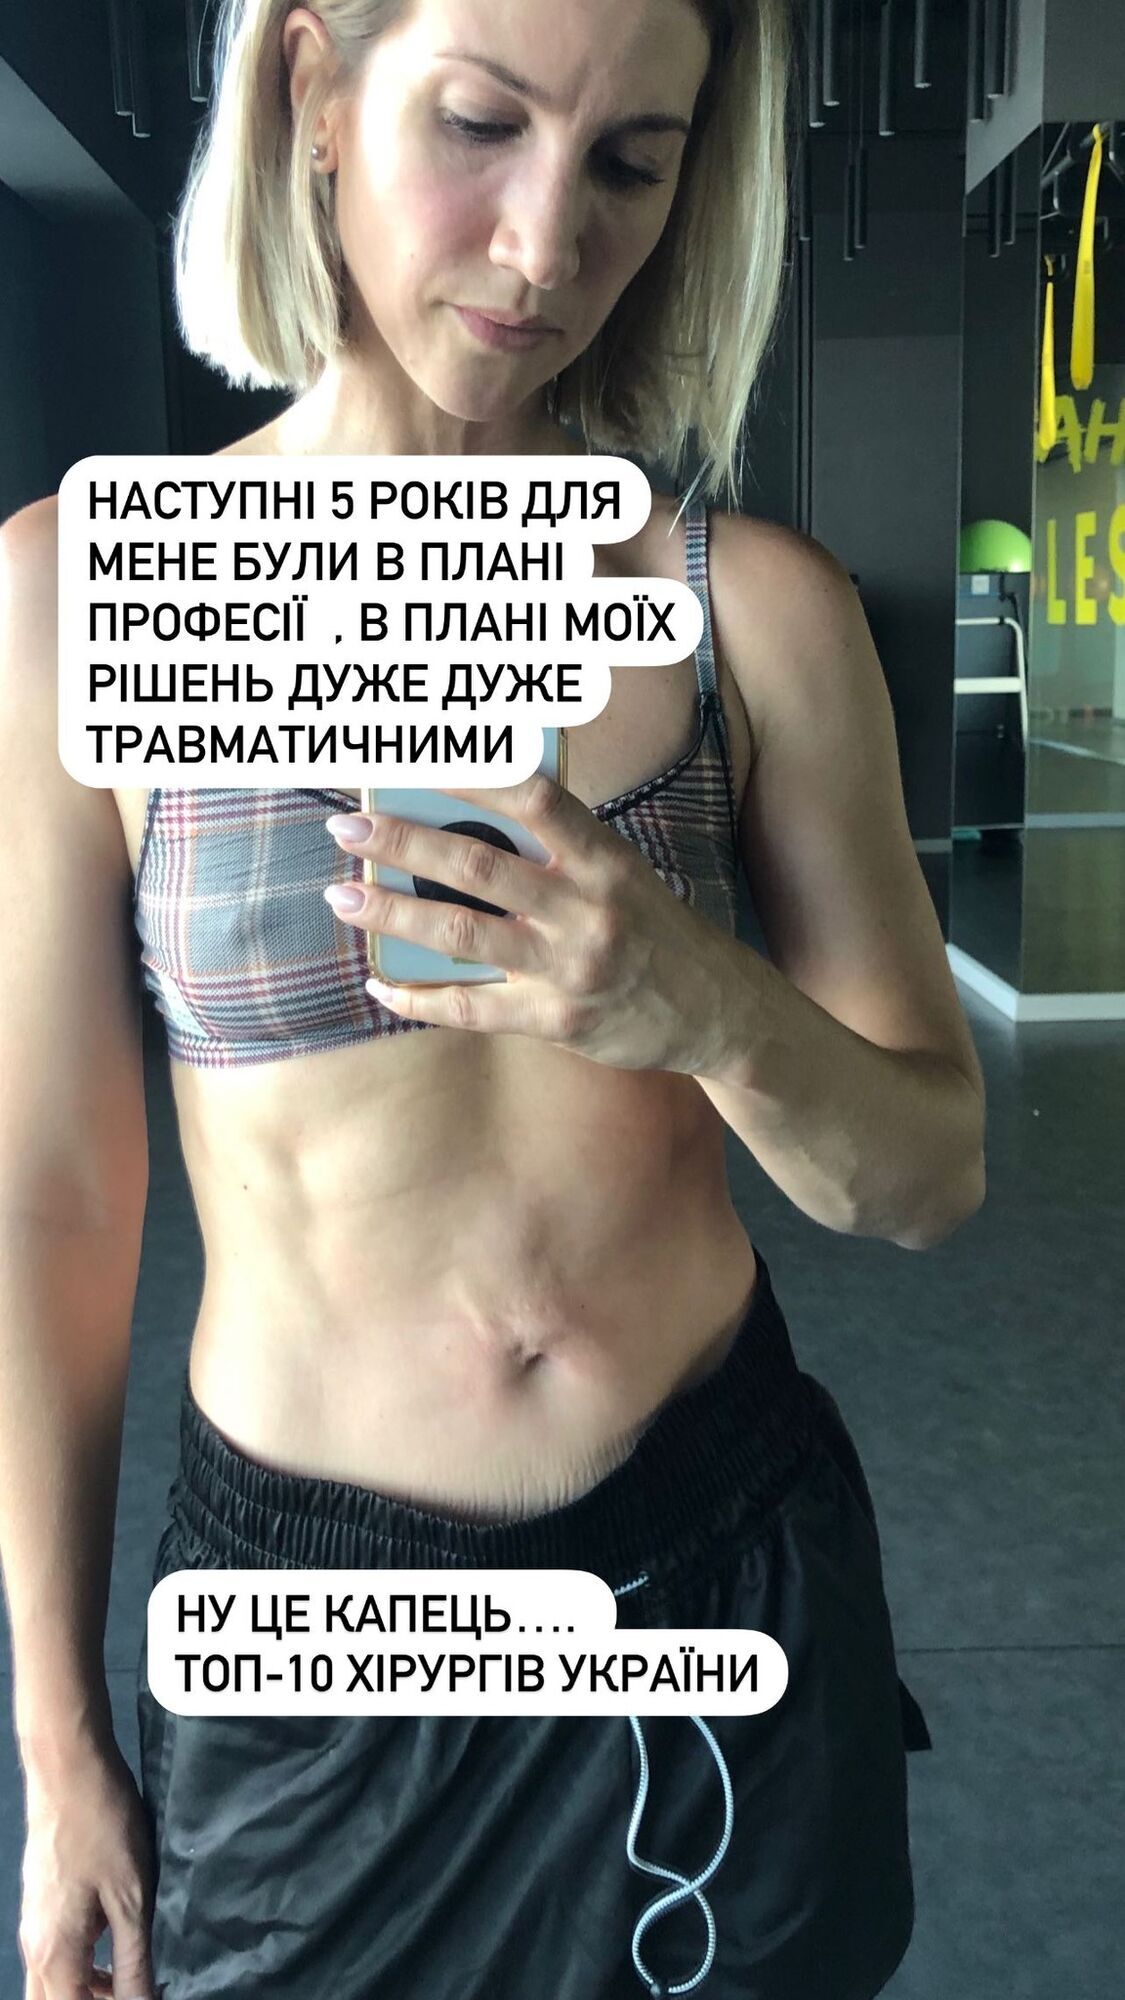 For the first time, Anita Lutsenko showed a photo of how she was disfigured by a surgeon from the top 10 best in Ukraine and explained why she has been hiding her stomach lately